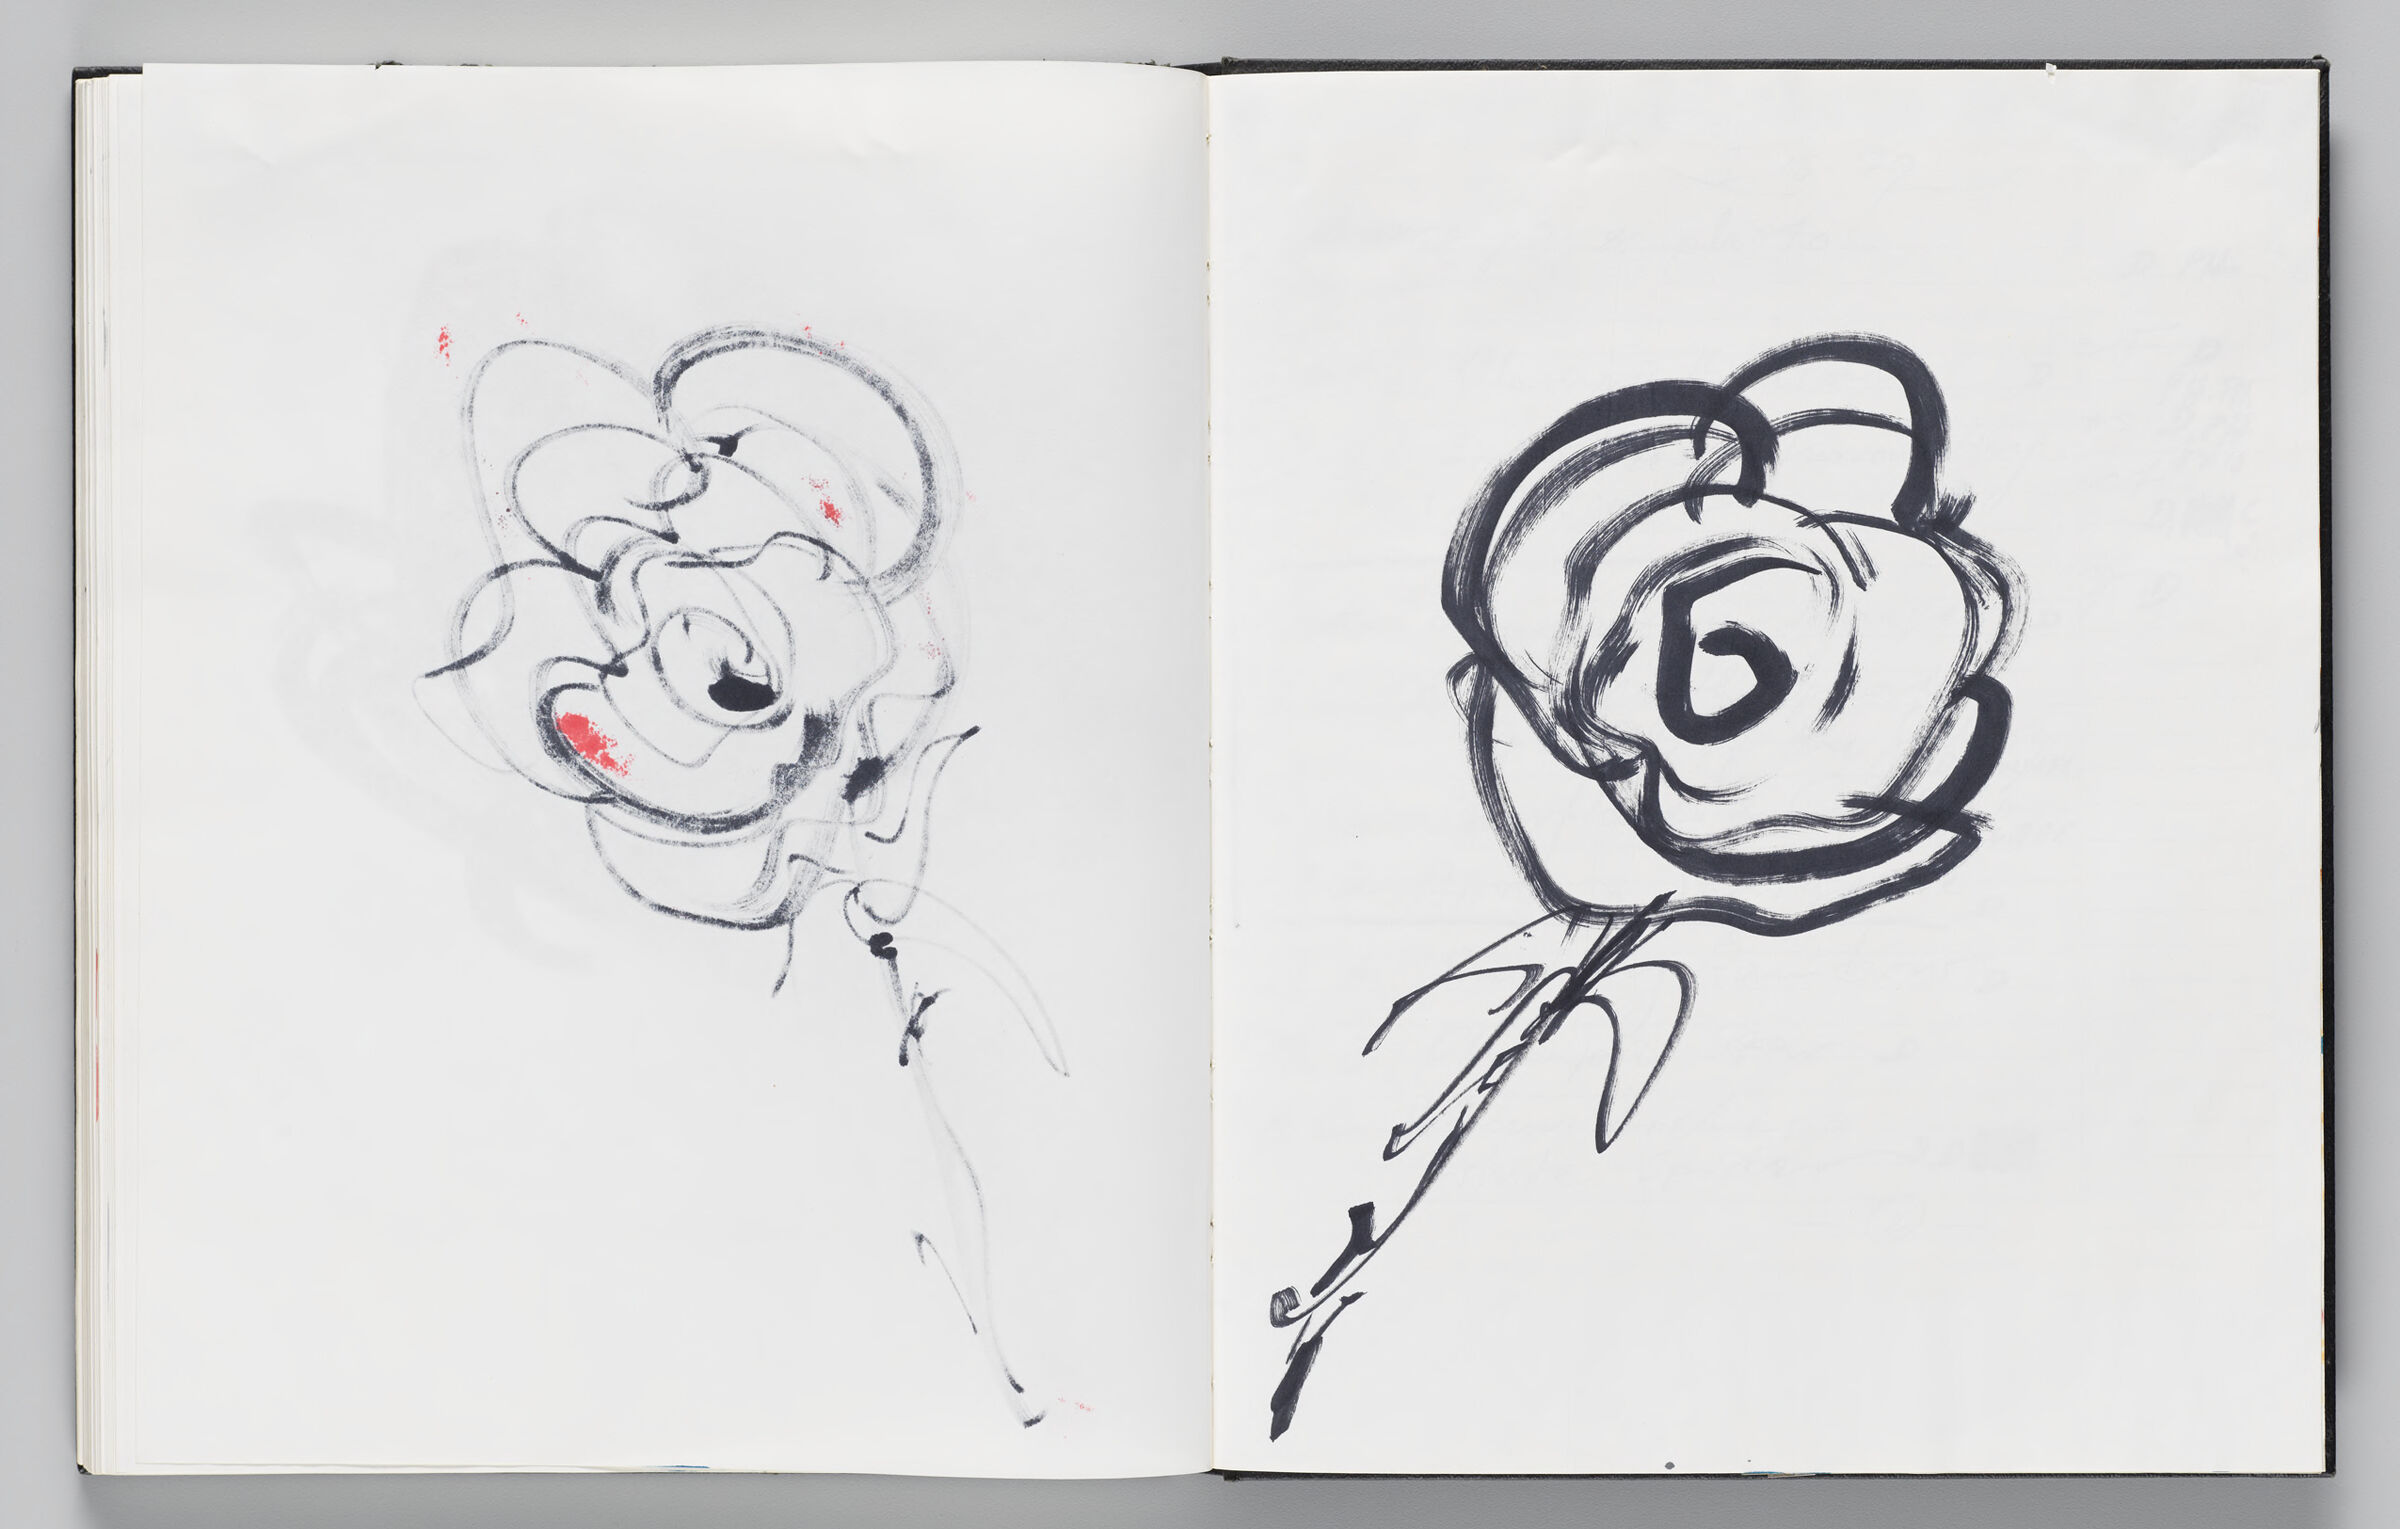 Untitled (Bleed-Through Of Previous Page, Left Page); Untitled (Flower, Right Page)